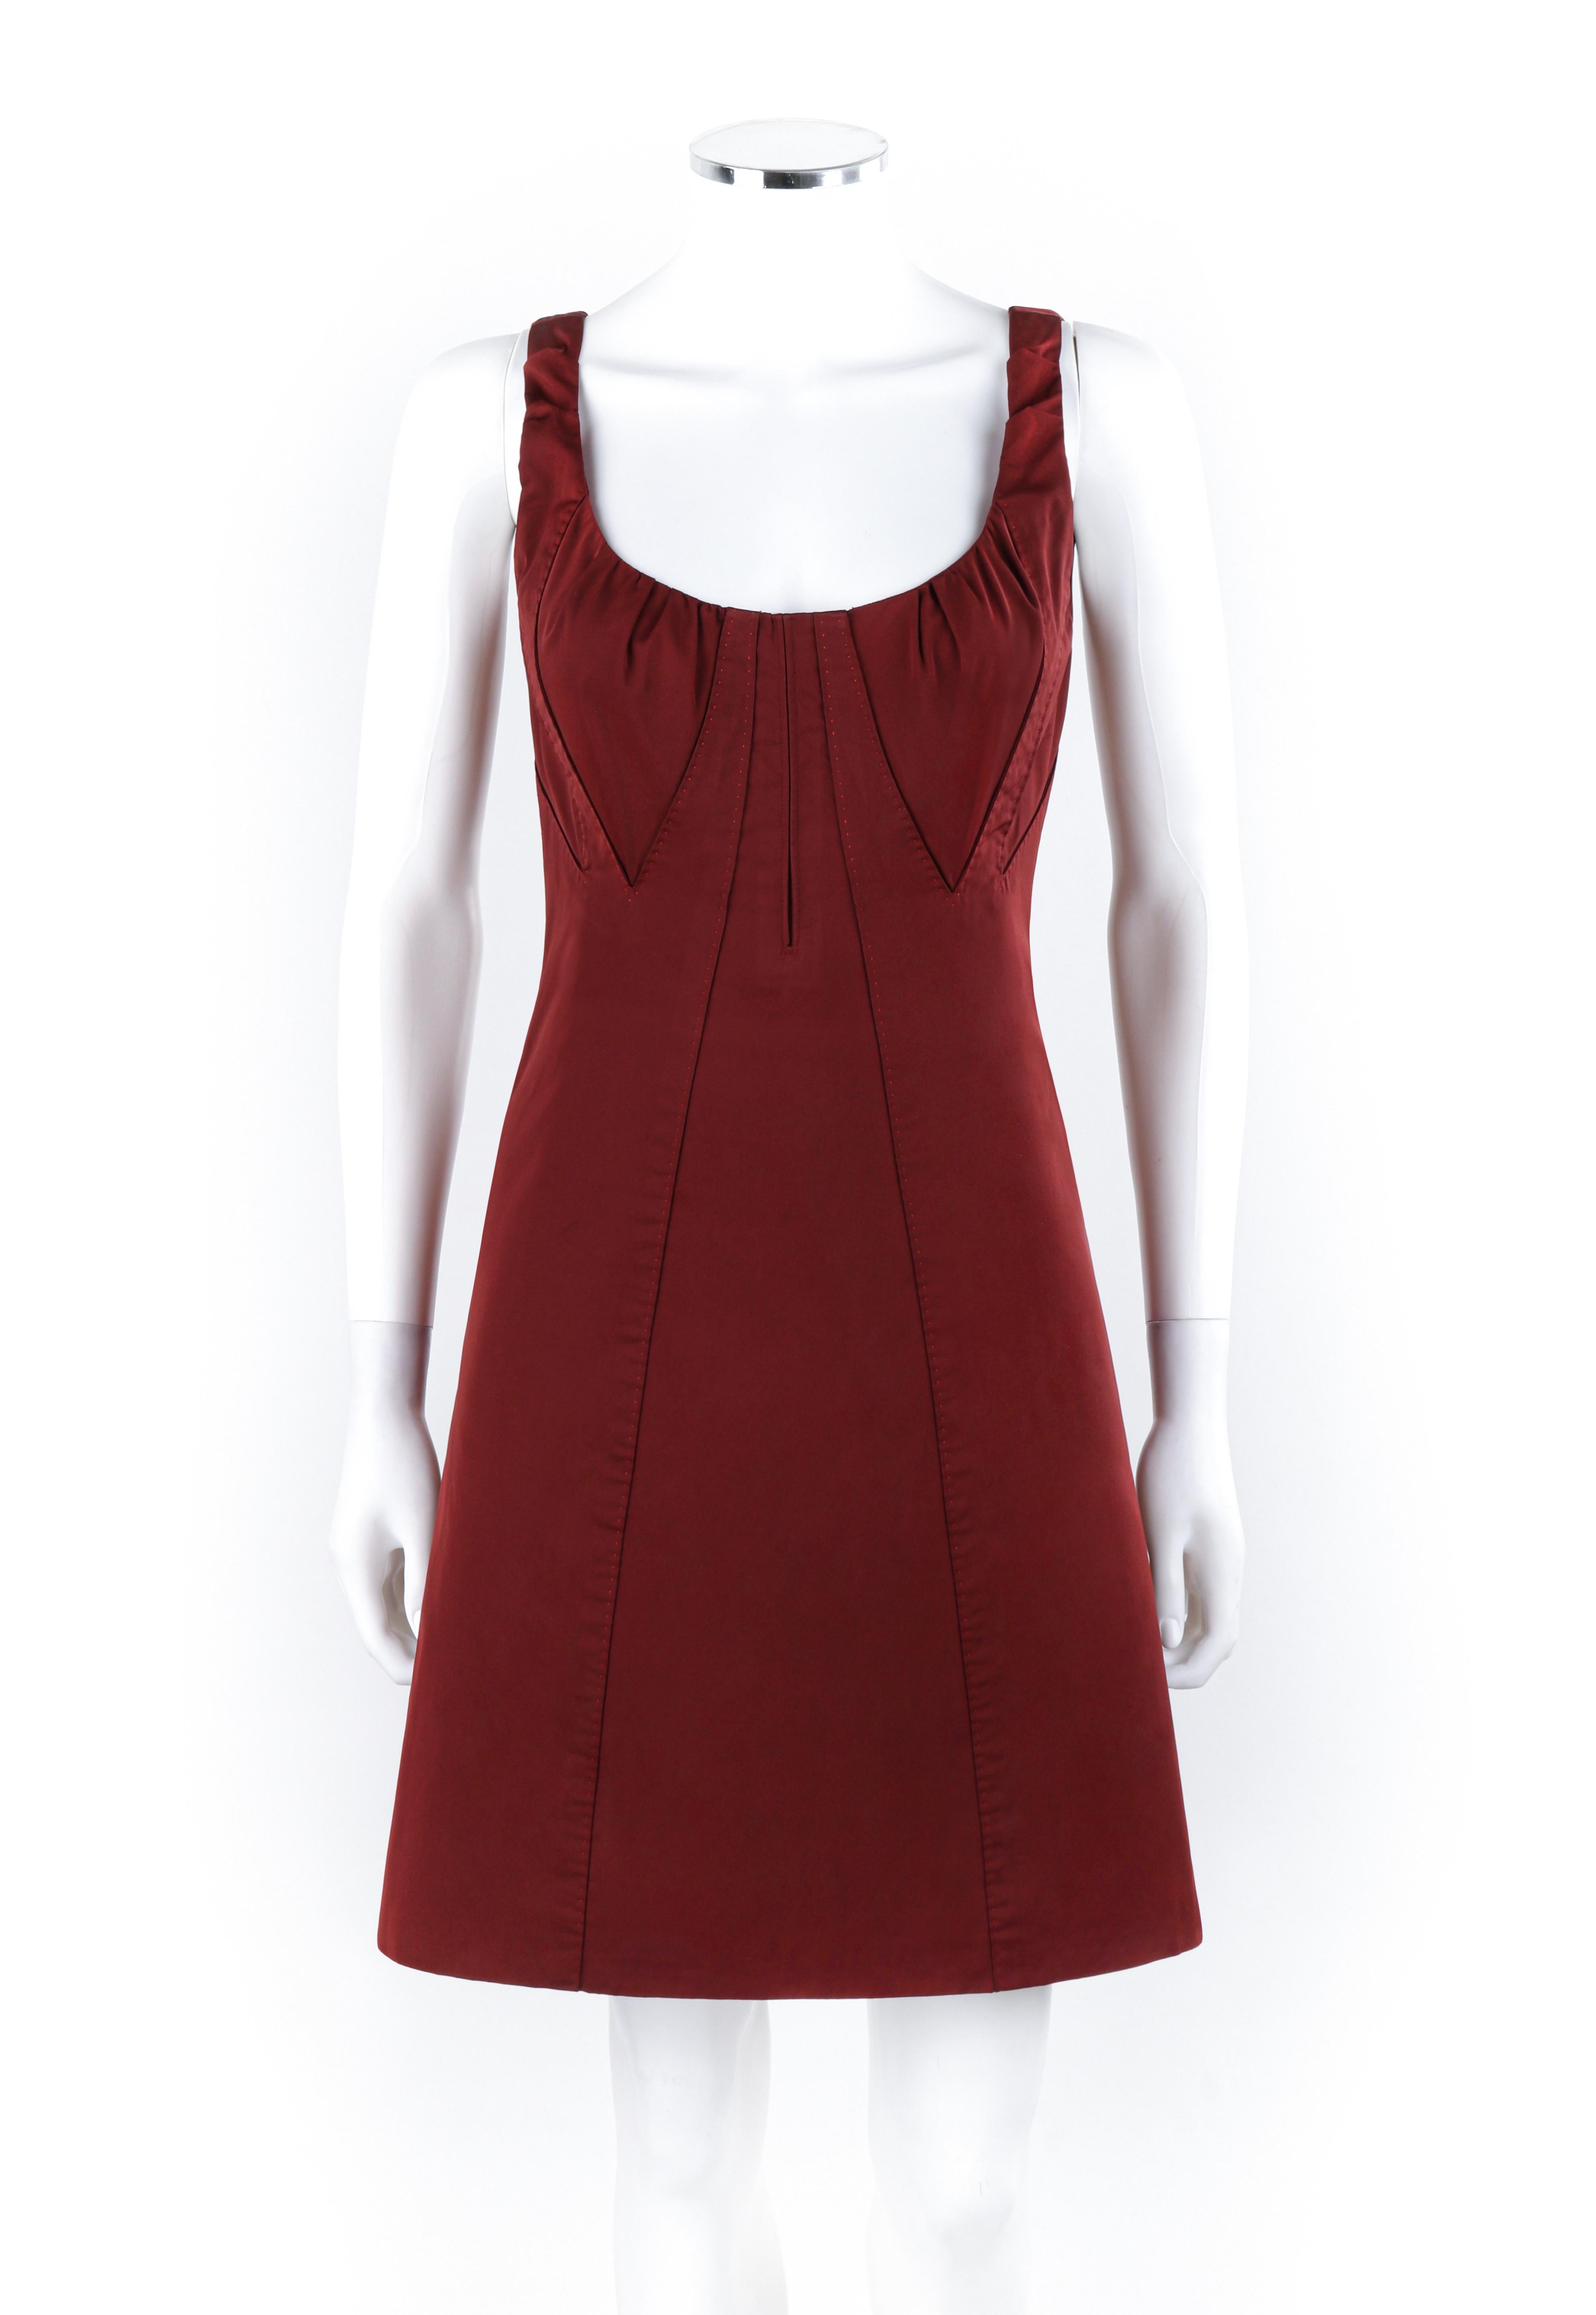 LOUIS VUITTON c.2000’s Burgundy Red Avant Garde Sleeveless Bustier A-Line Dress
 
Brand / Manufacturer: Louis Vuitton
Circa: 2000’s  
Style: A-line dress
Color(s): Burgundy red
Lined: Yes
Unmarked Fabric Content (feel of): Silk Taffeta
Additional